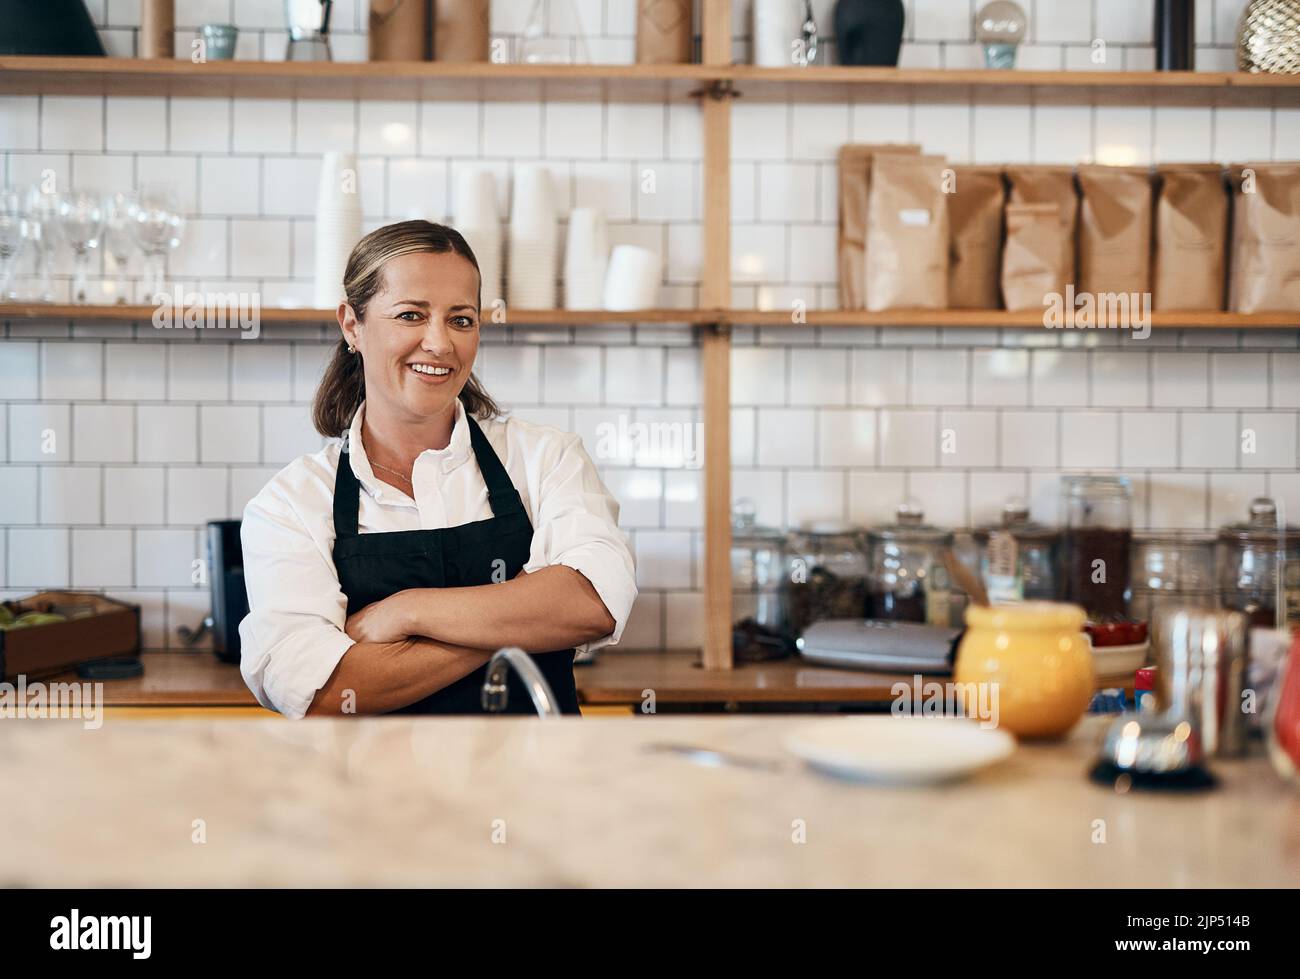 Business owner, barista standing with arms crossed, looking confident and proud while working at a restaurant. Cafe worker, employee and entrepreneur Stock Photo